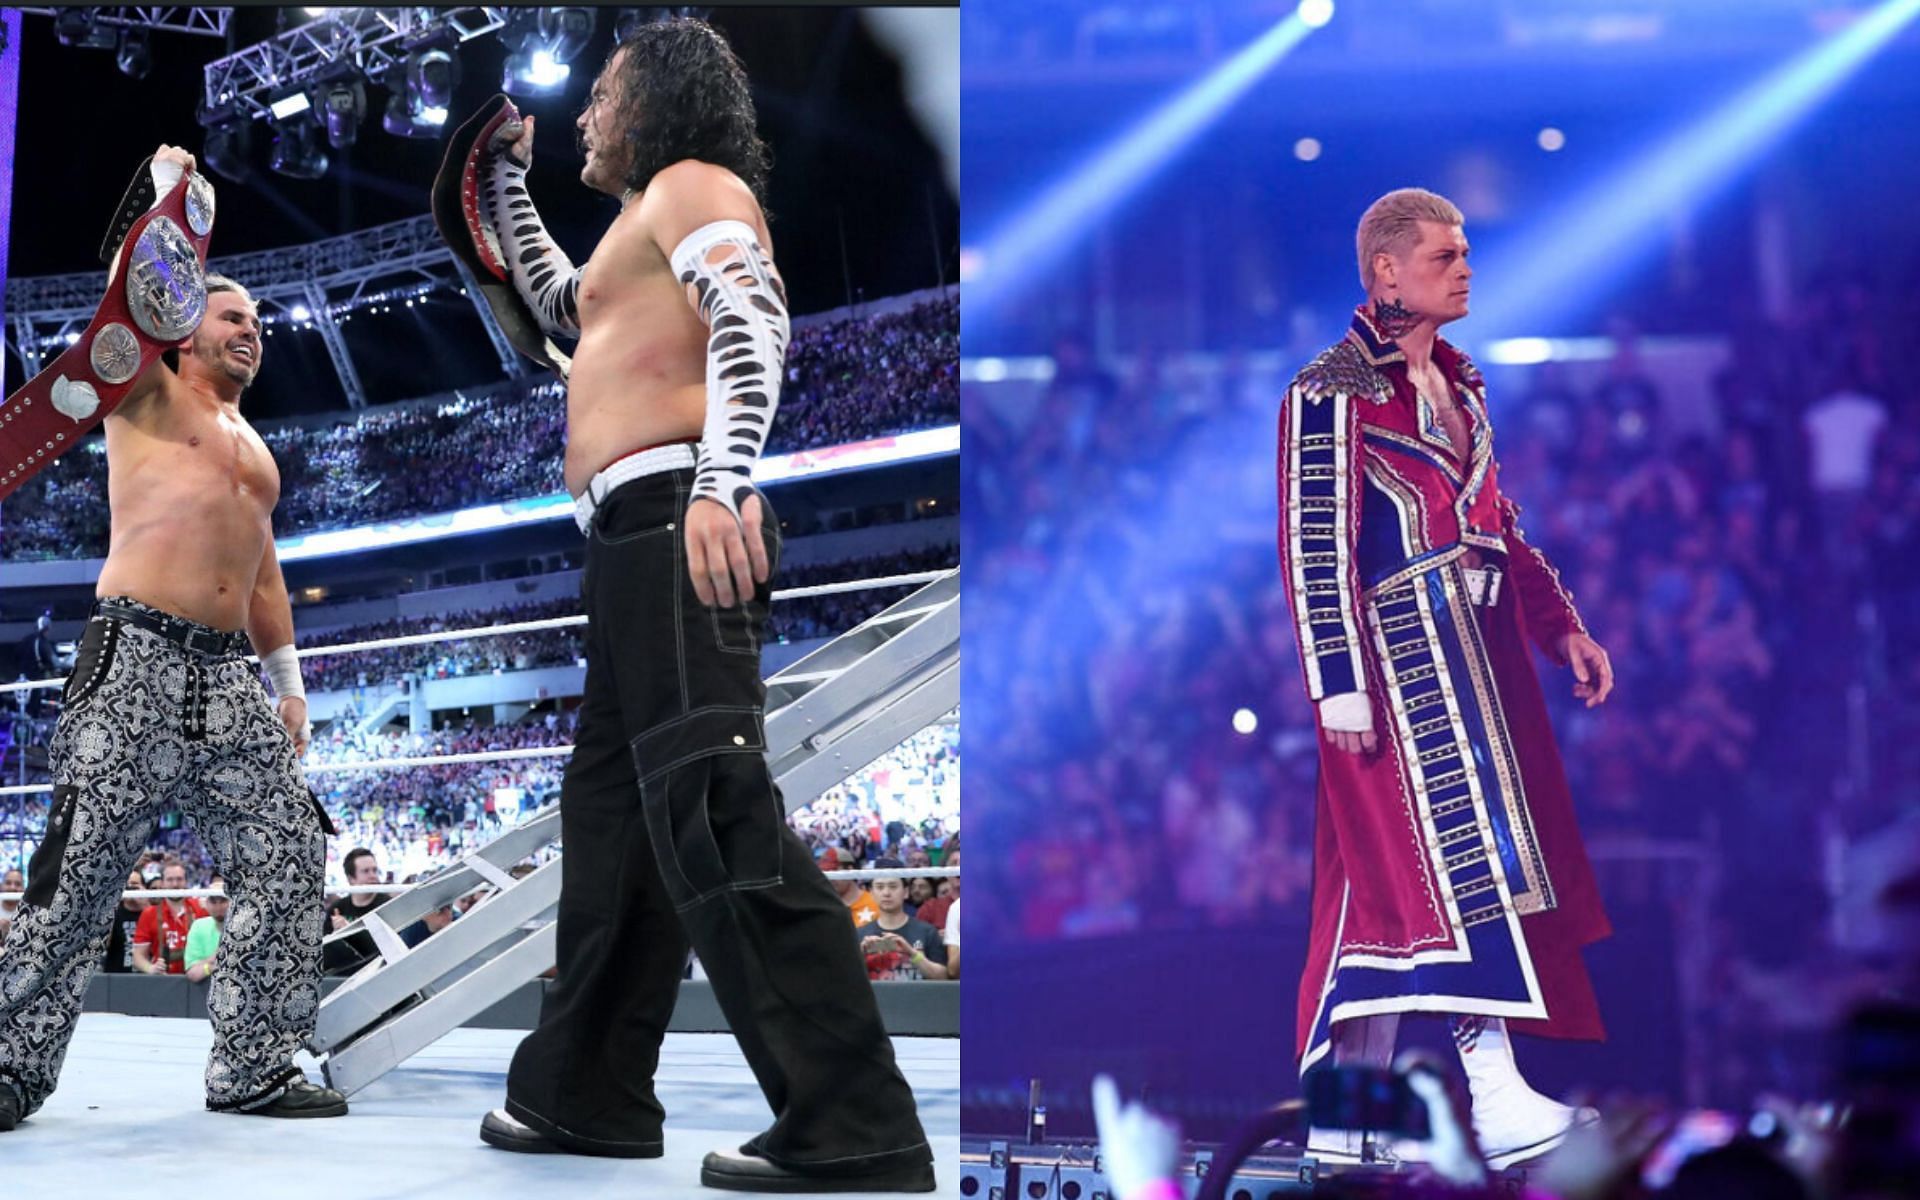 (Left): The Hardy Boyz celebrating victory after WrestleMania 33 win; (Right): Cody Rhodes 